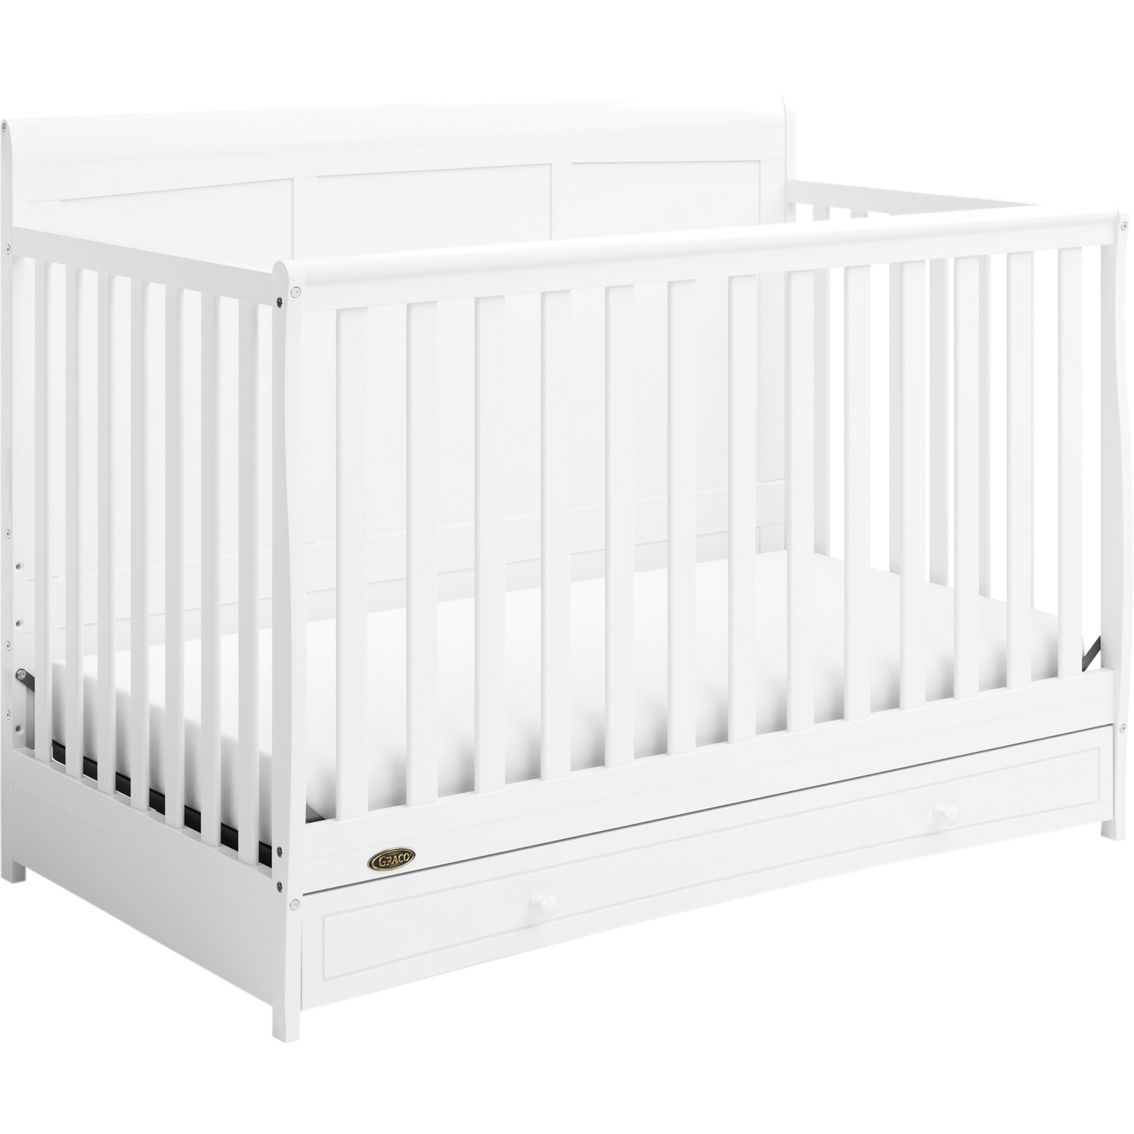 Graco Asheville 4-in-1 Convertible Crib with Drawer - Image 1 of 8